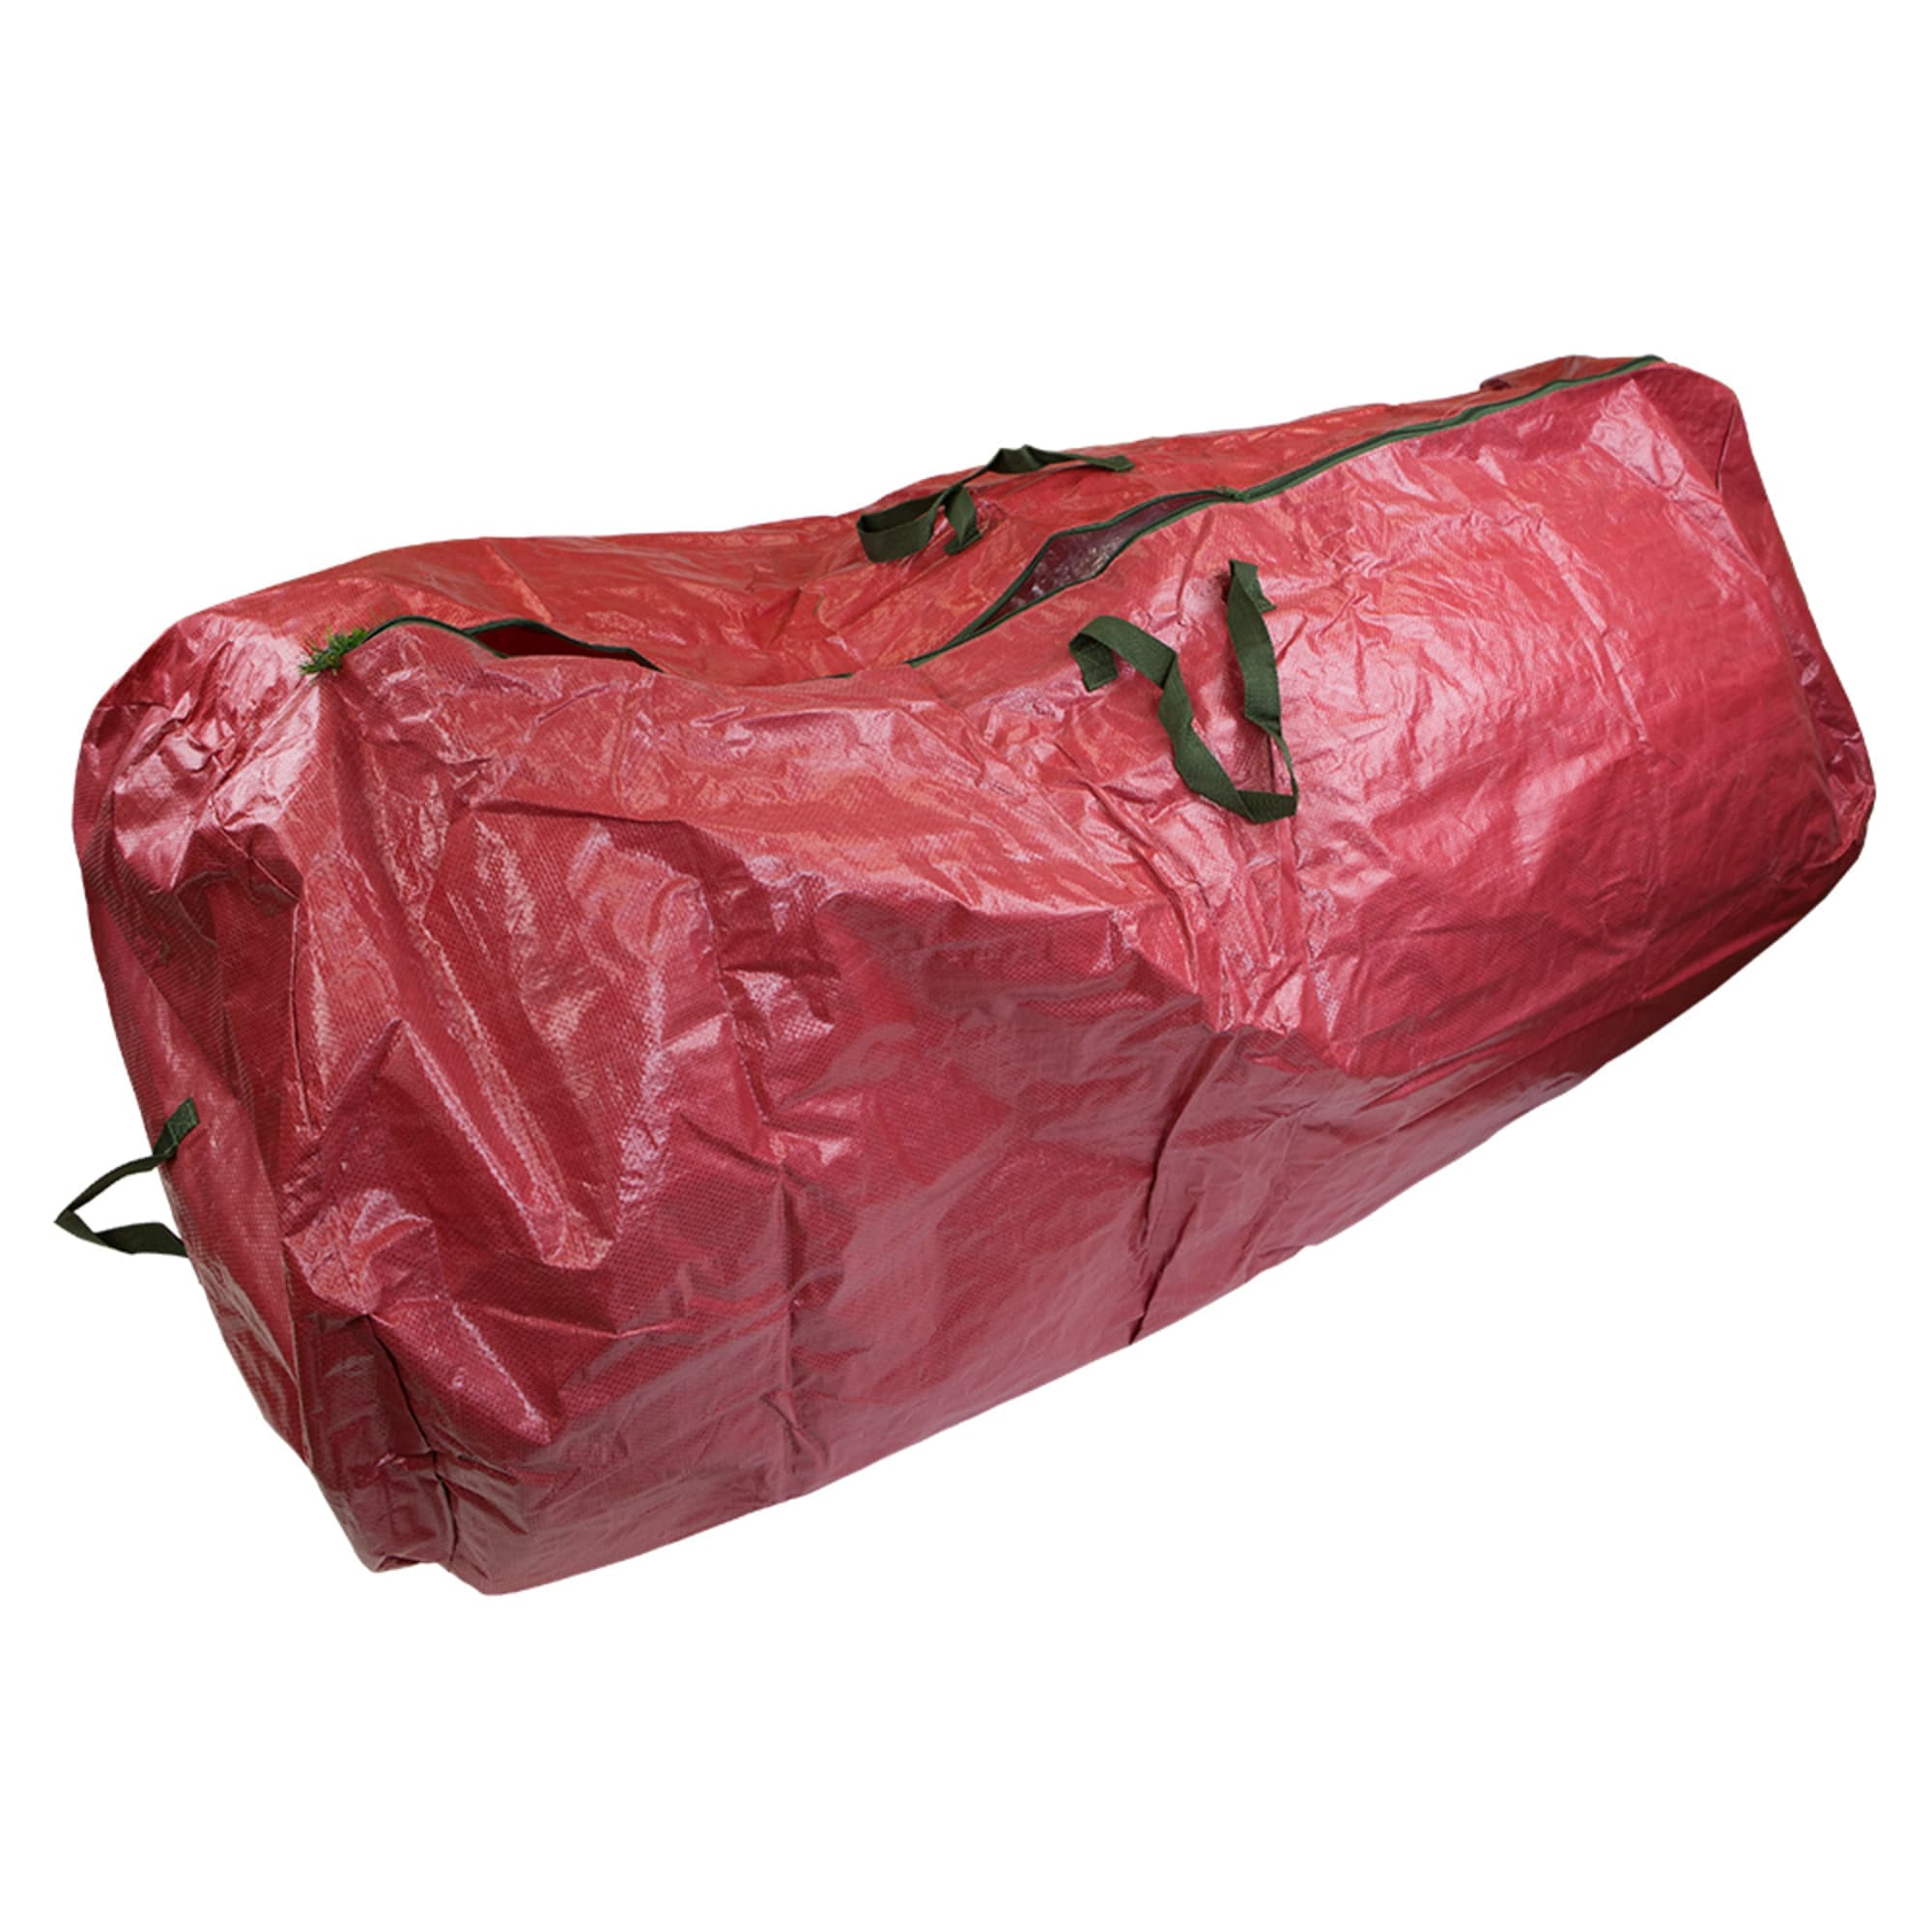 Home Basics Christmas Tree Storage Bag,  Red $10.00 EACH, CASE PACK OF 12